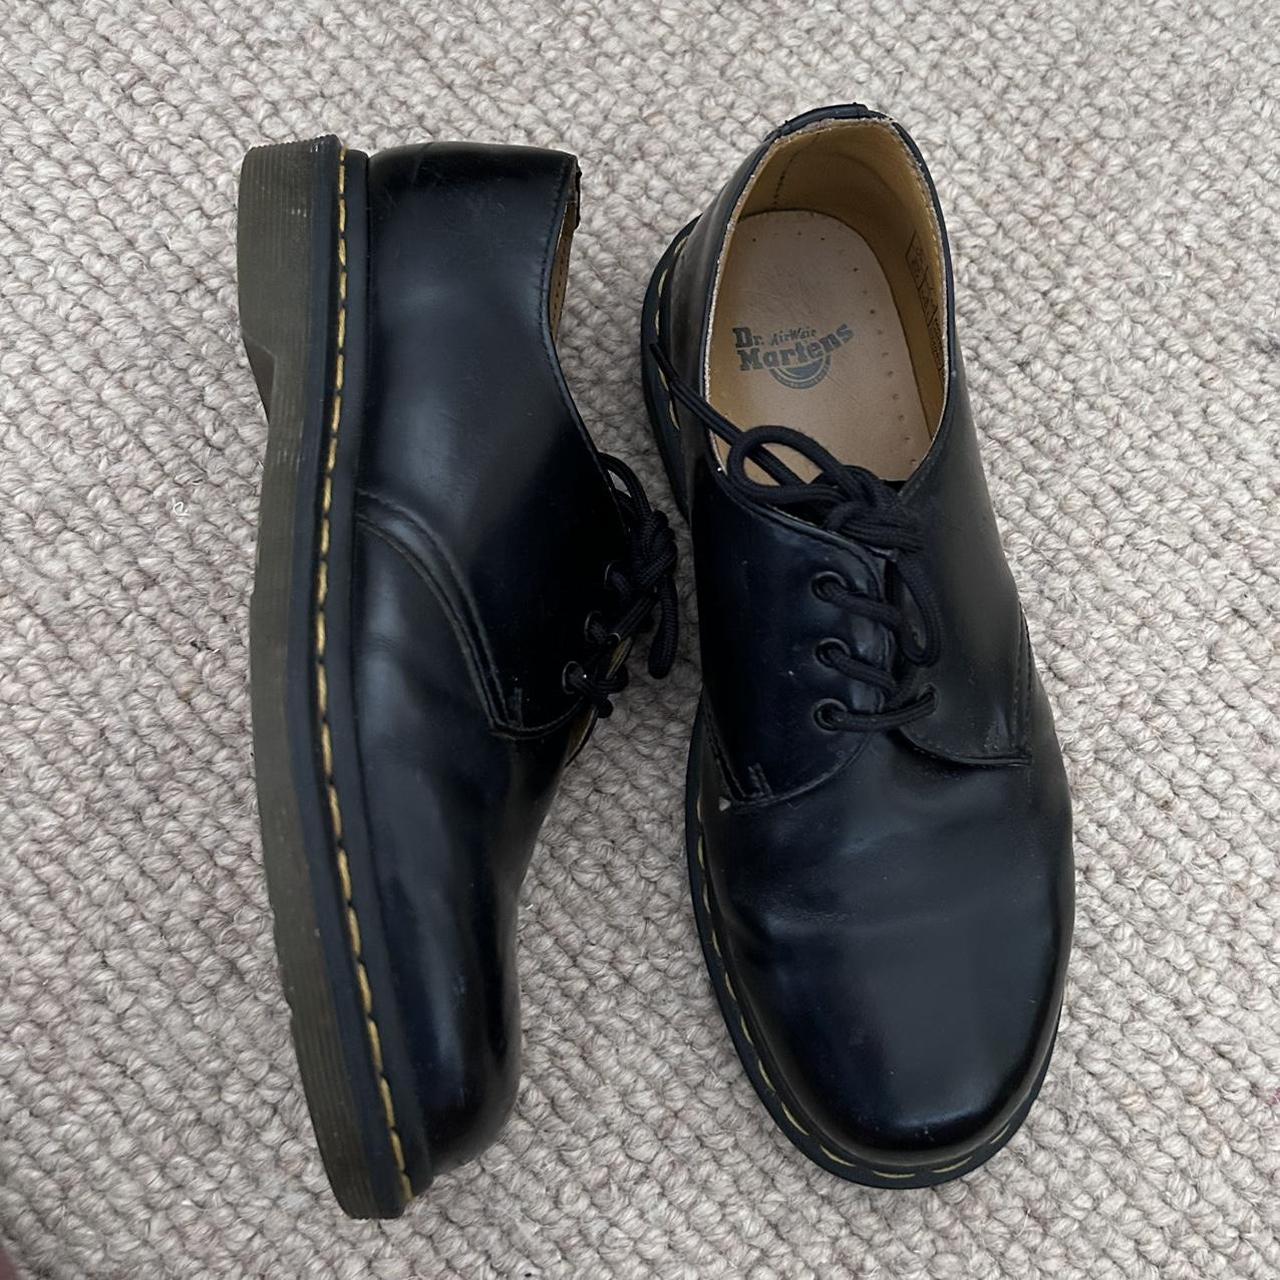 doc martens 1461 - size 8 womens. few marks here and... - Depop